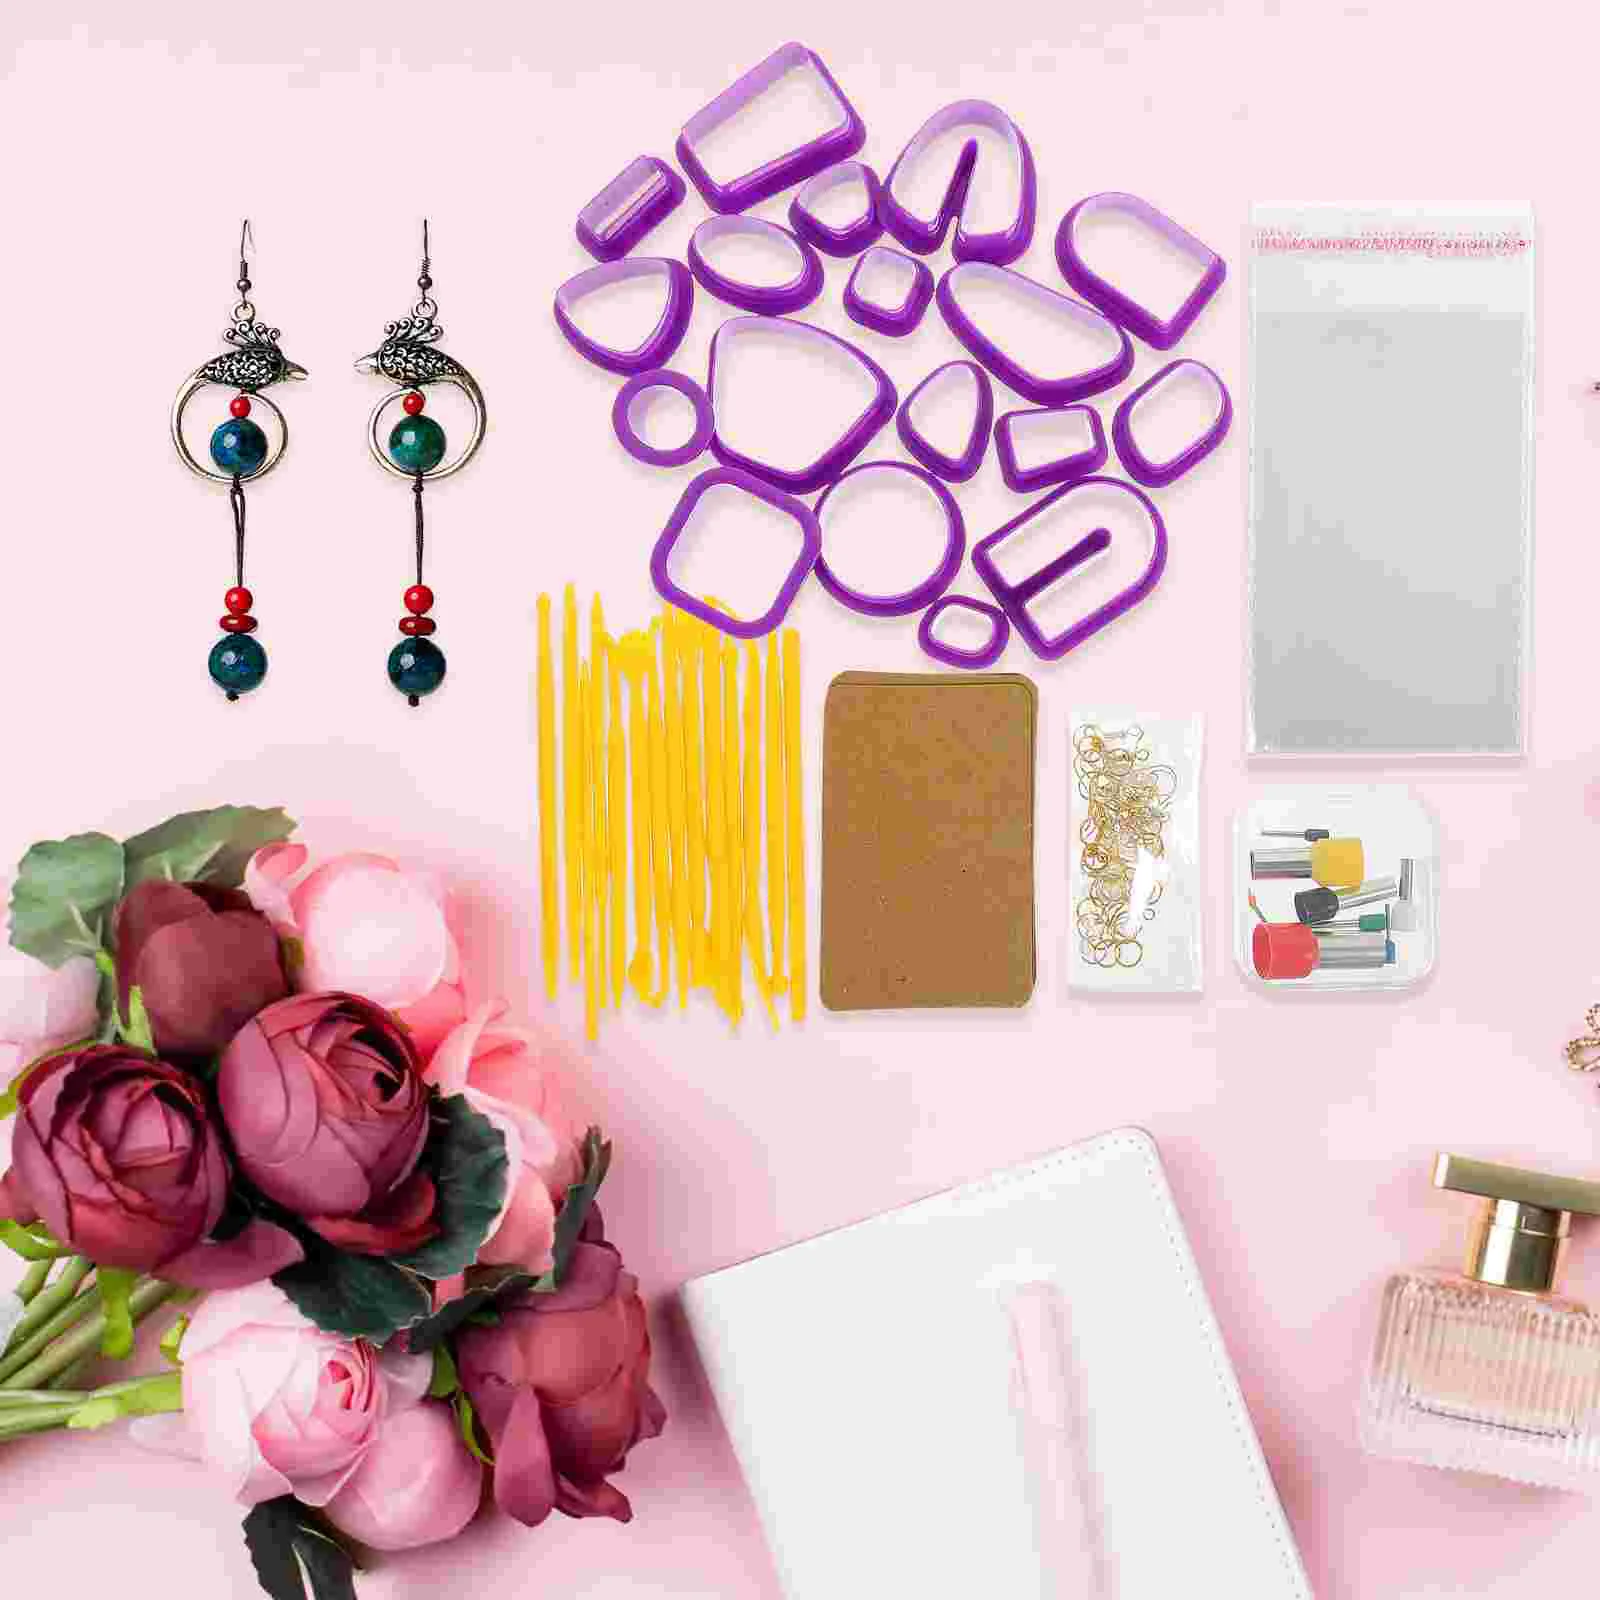 

Portable Lasting Convenient Multi-functional Practical Clay Earring Making Kit Clay Earring Making Set for Handcrafting